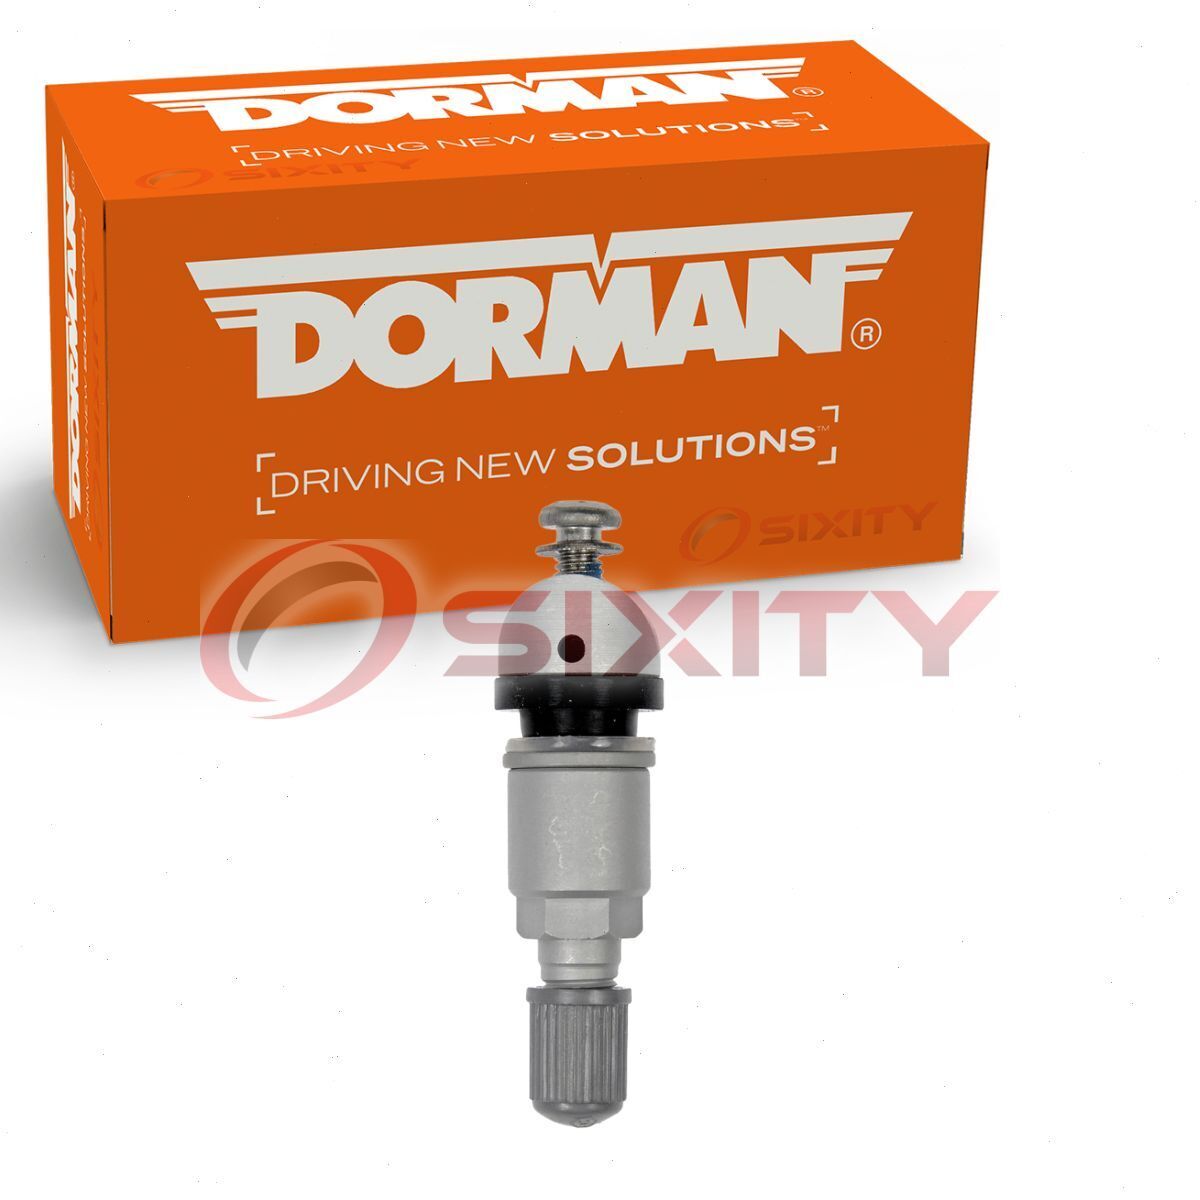 Dorman TPMS Valve Kit for 1999 BMW 328is Tire Pressure Monitoring System  ac